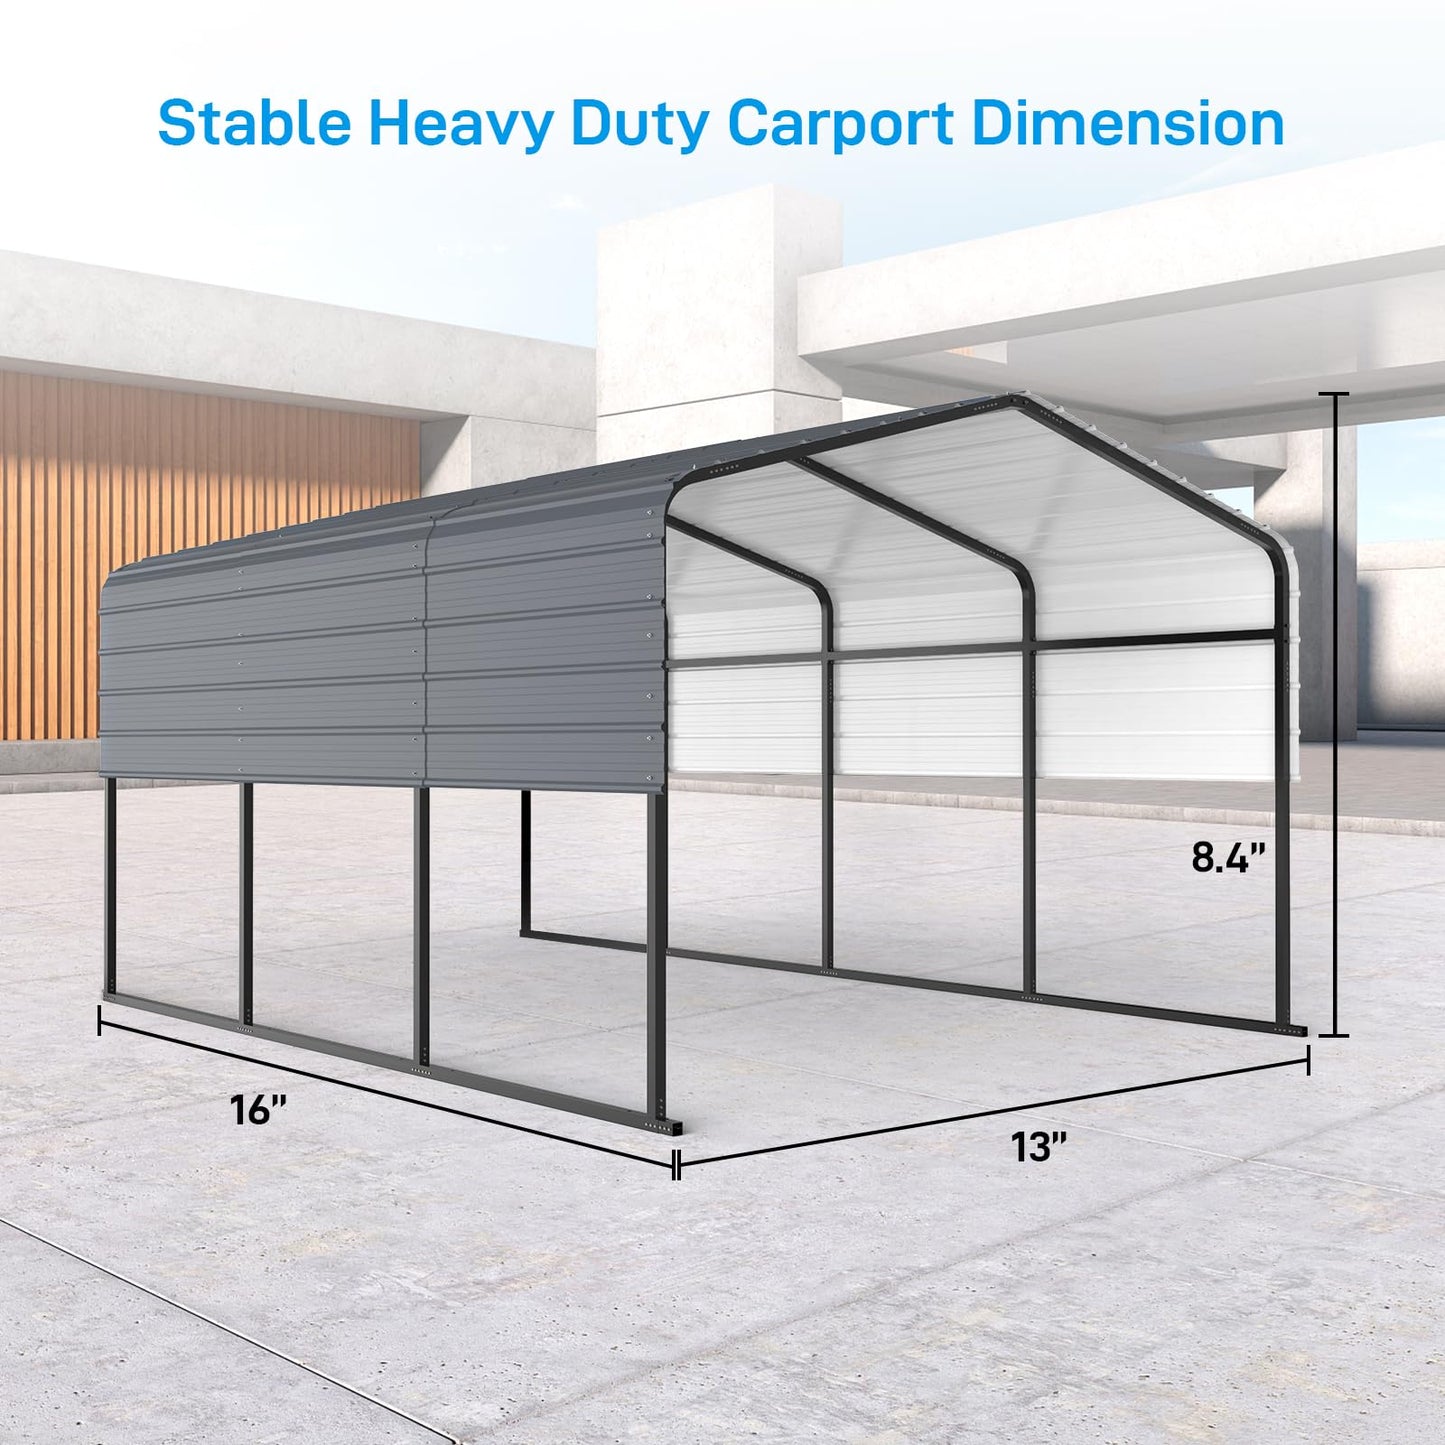 ACONEE 13' x 16' Carport, Metal Carport with Heavy Duty Galvanized Steel Roof & Frame, Outdoor Carport Canopy Car Garage Shelter with Sidewall Panel, Multi-use Storage Shed Car Port for Car, Grey